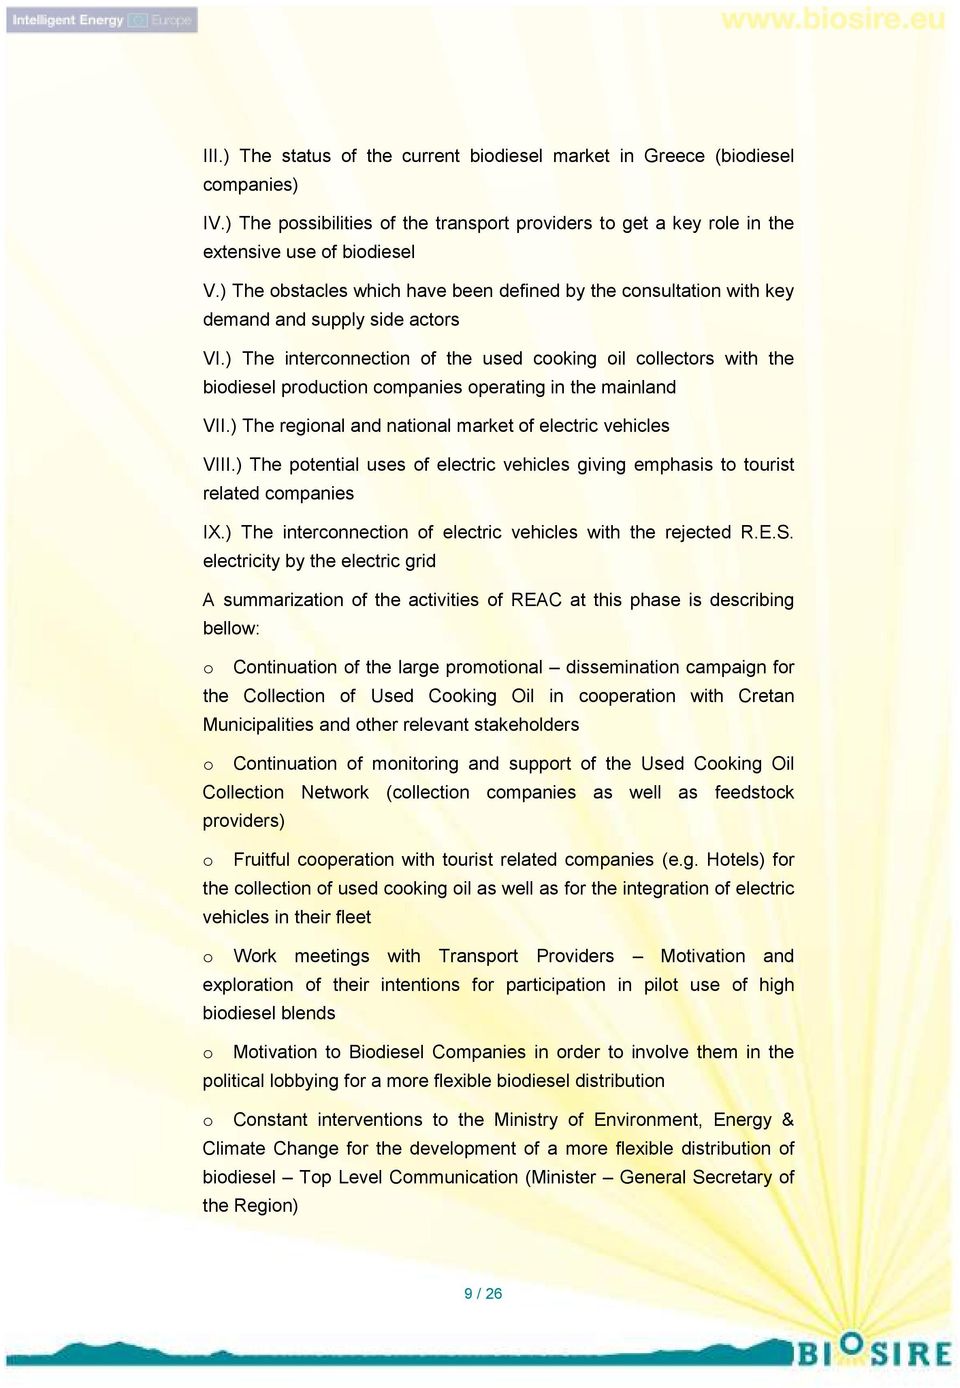 ) The interconnection of the used cooking oil collectors with the biodiesel production companies operating in the mainland VII.) The regional and national market of electric vehicles VIII.